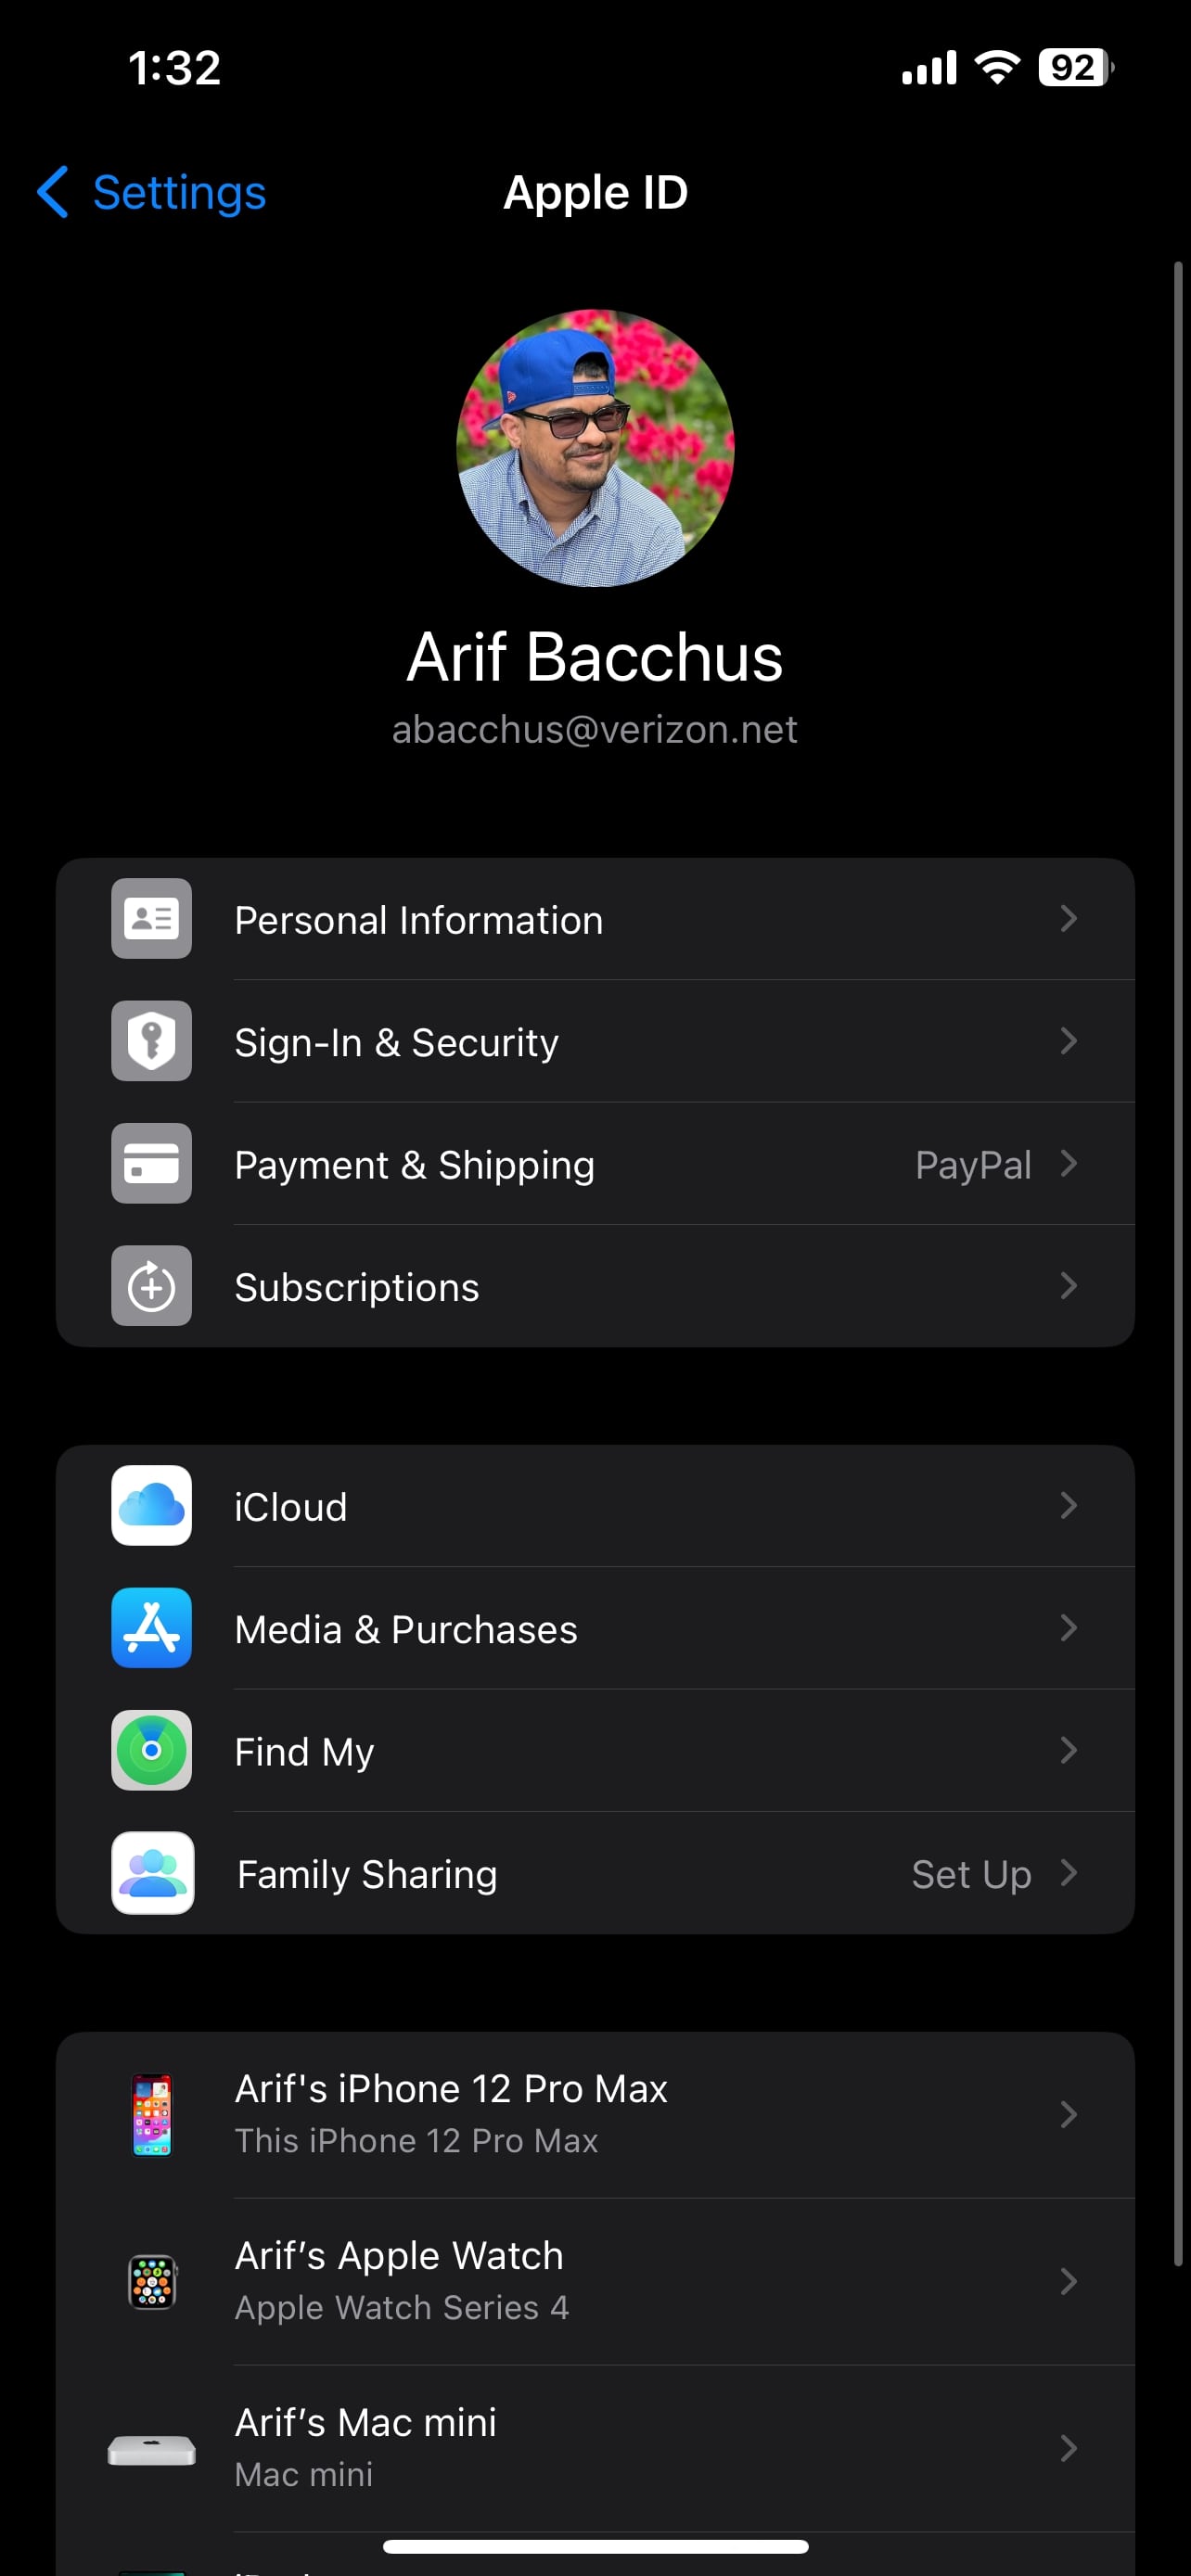 A screenshot of the Apple ID settings page on an iPhone